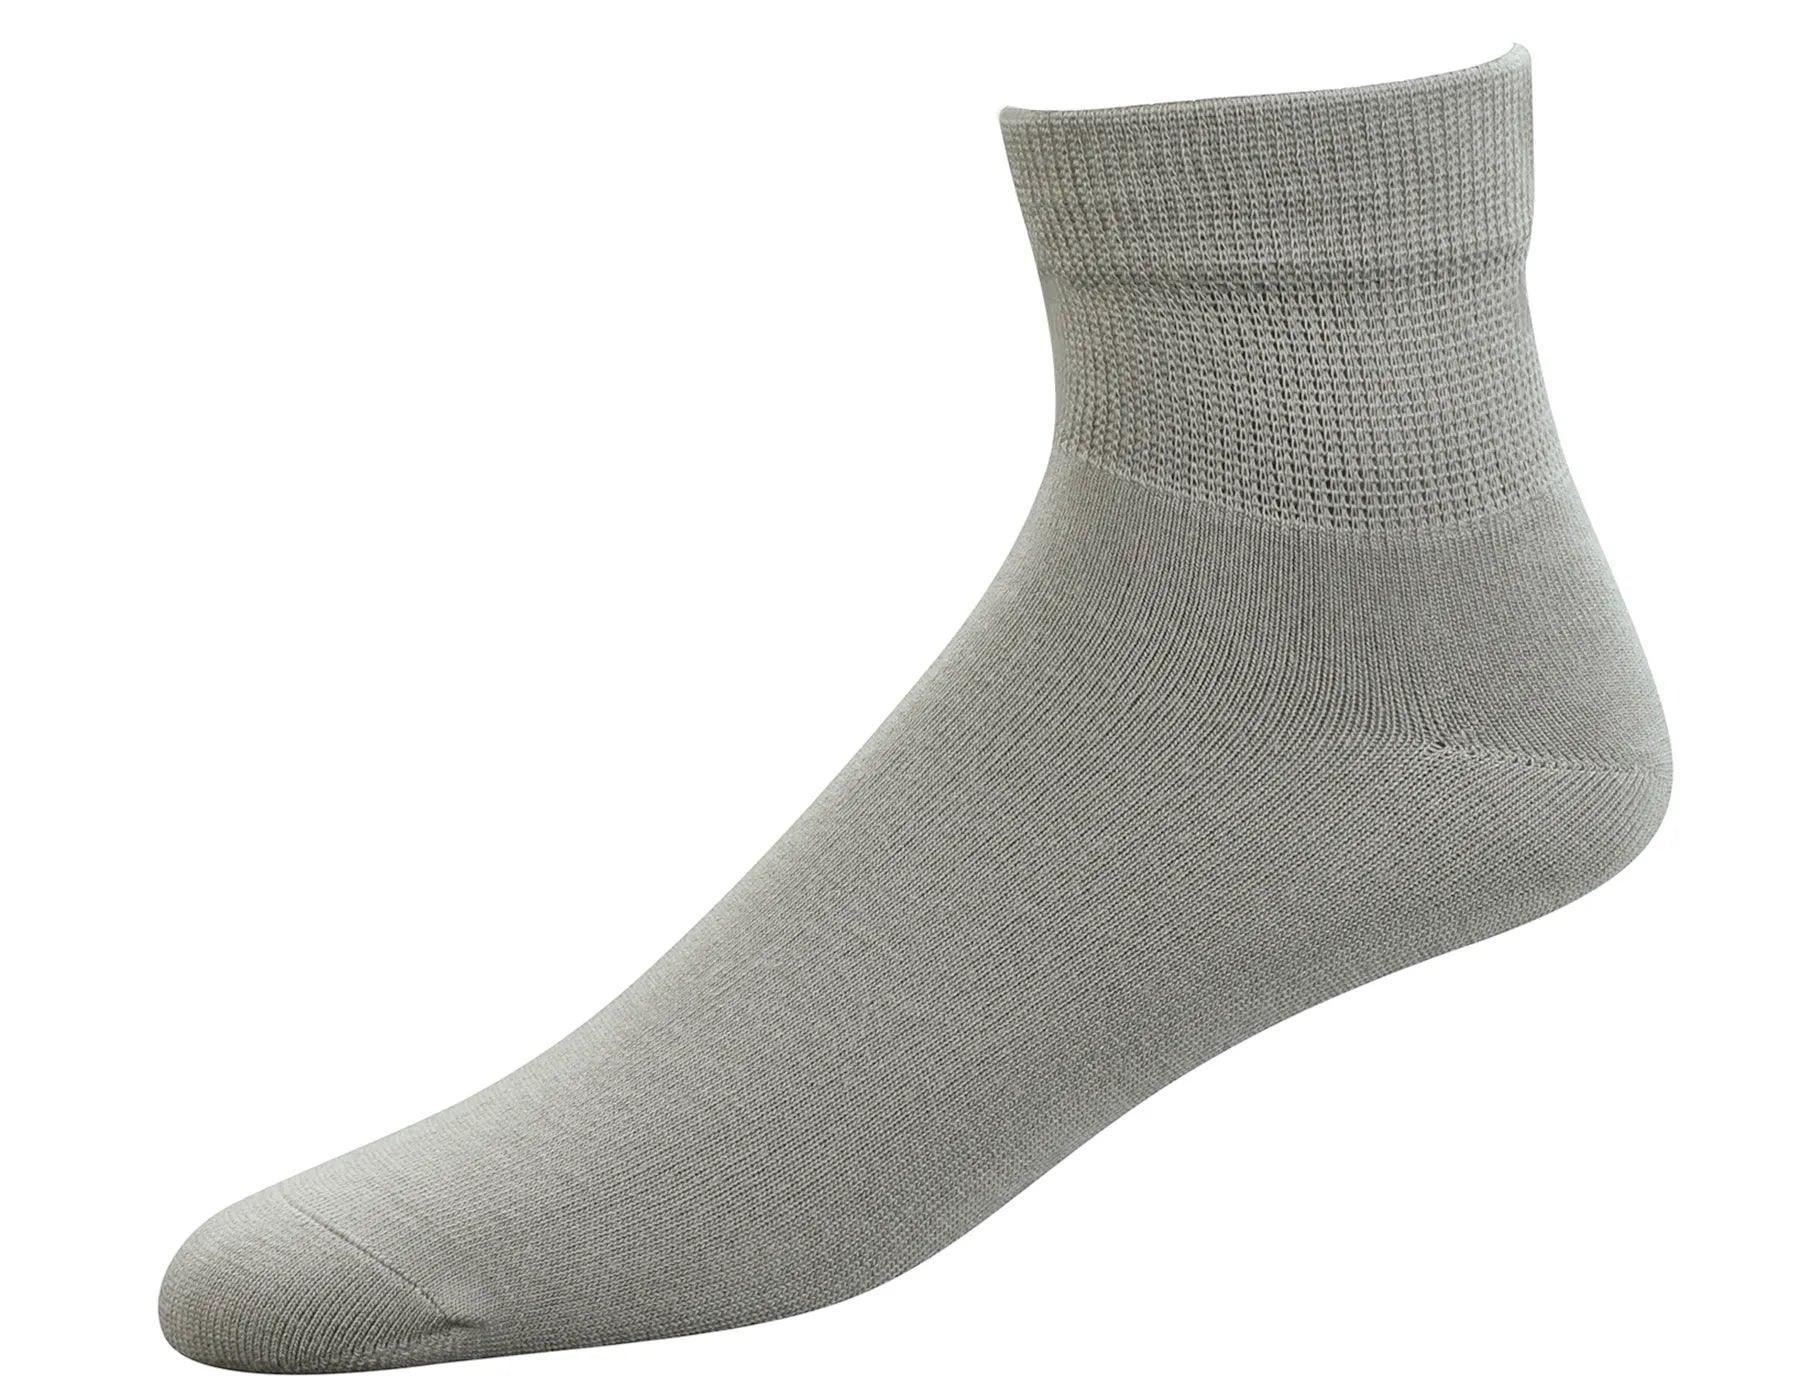 6 Pairs Men's Bamboo Diabetic Ankle Socks with Seamless Toe - Bamboo.